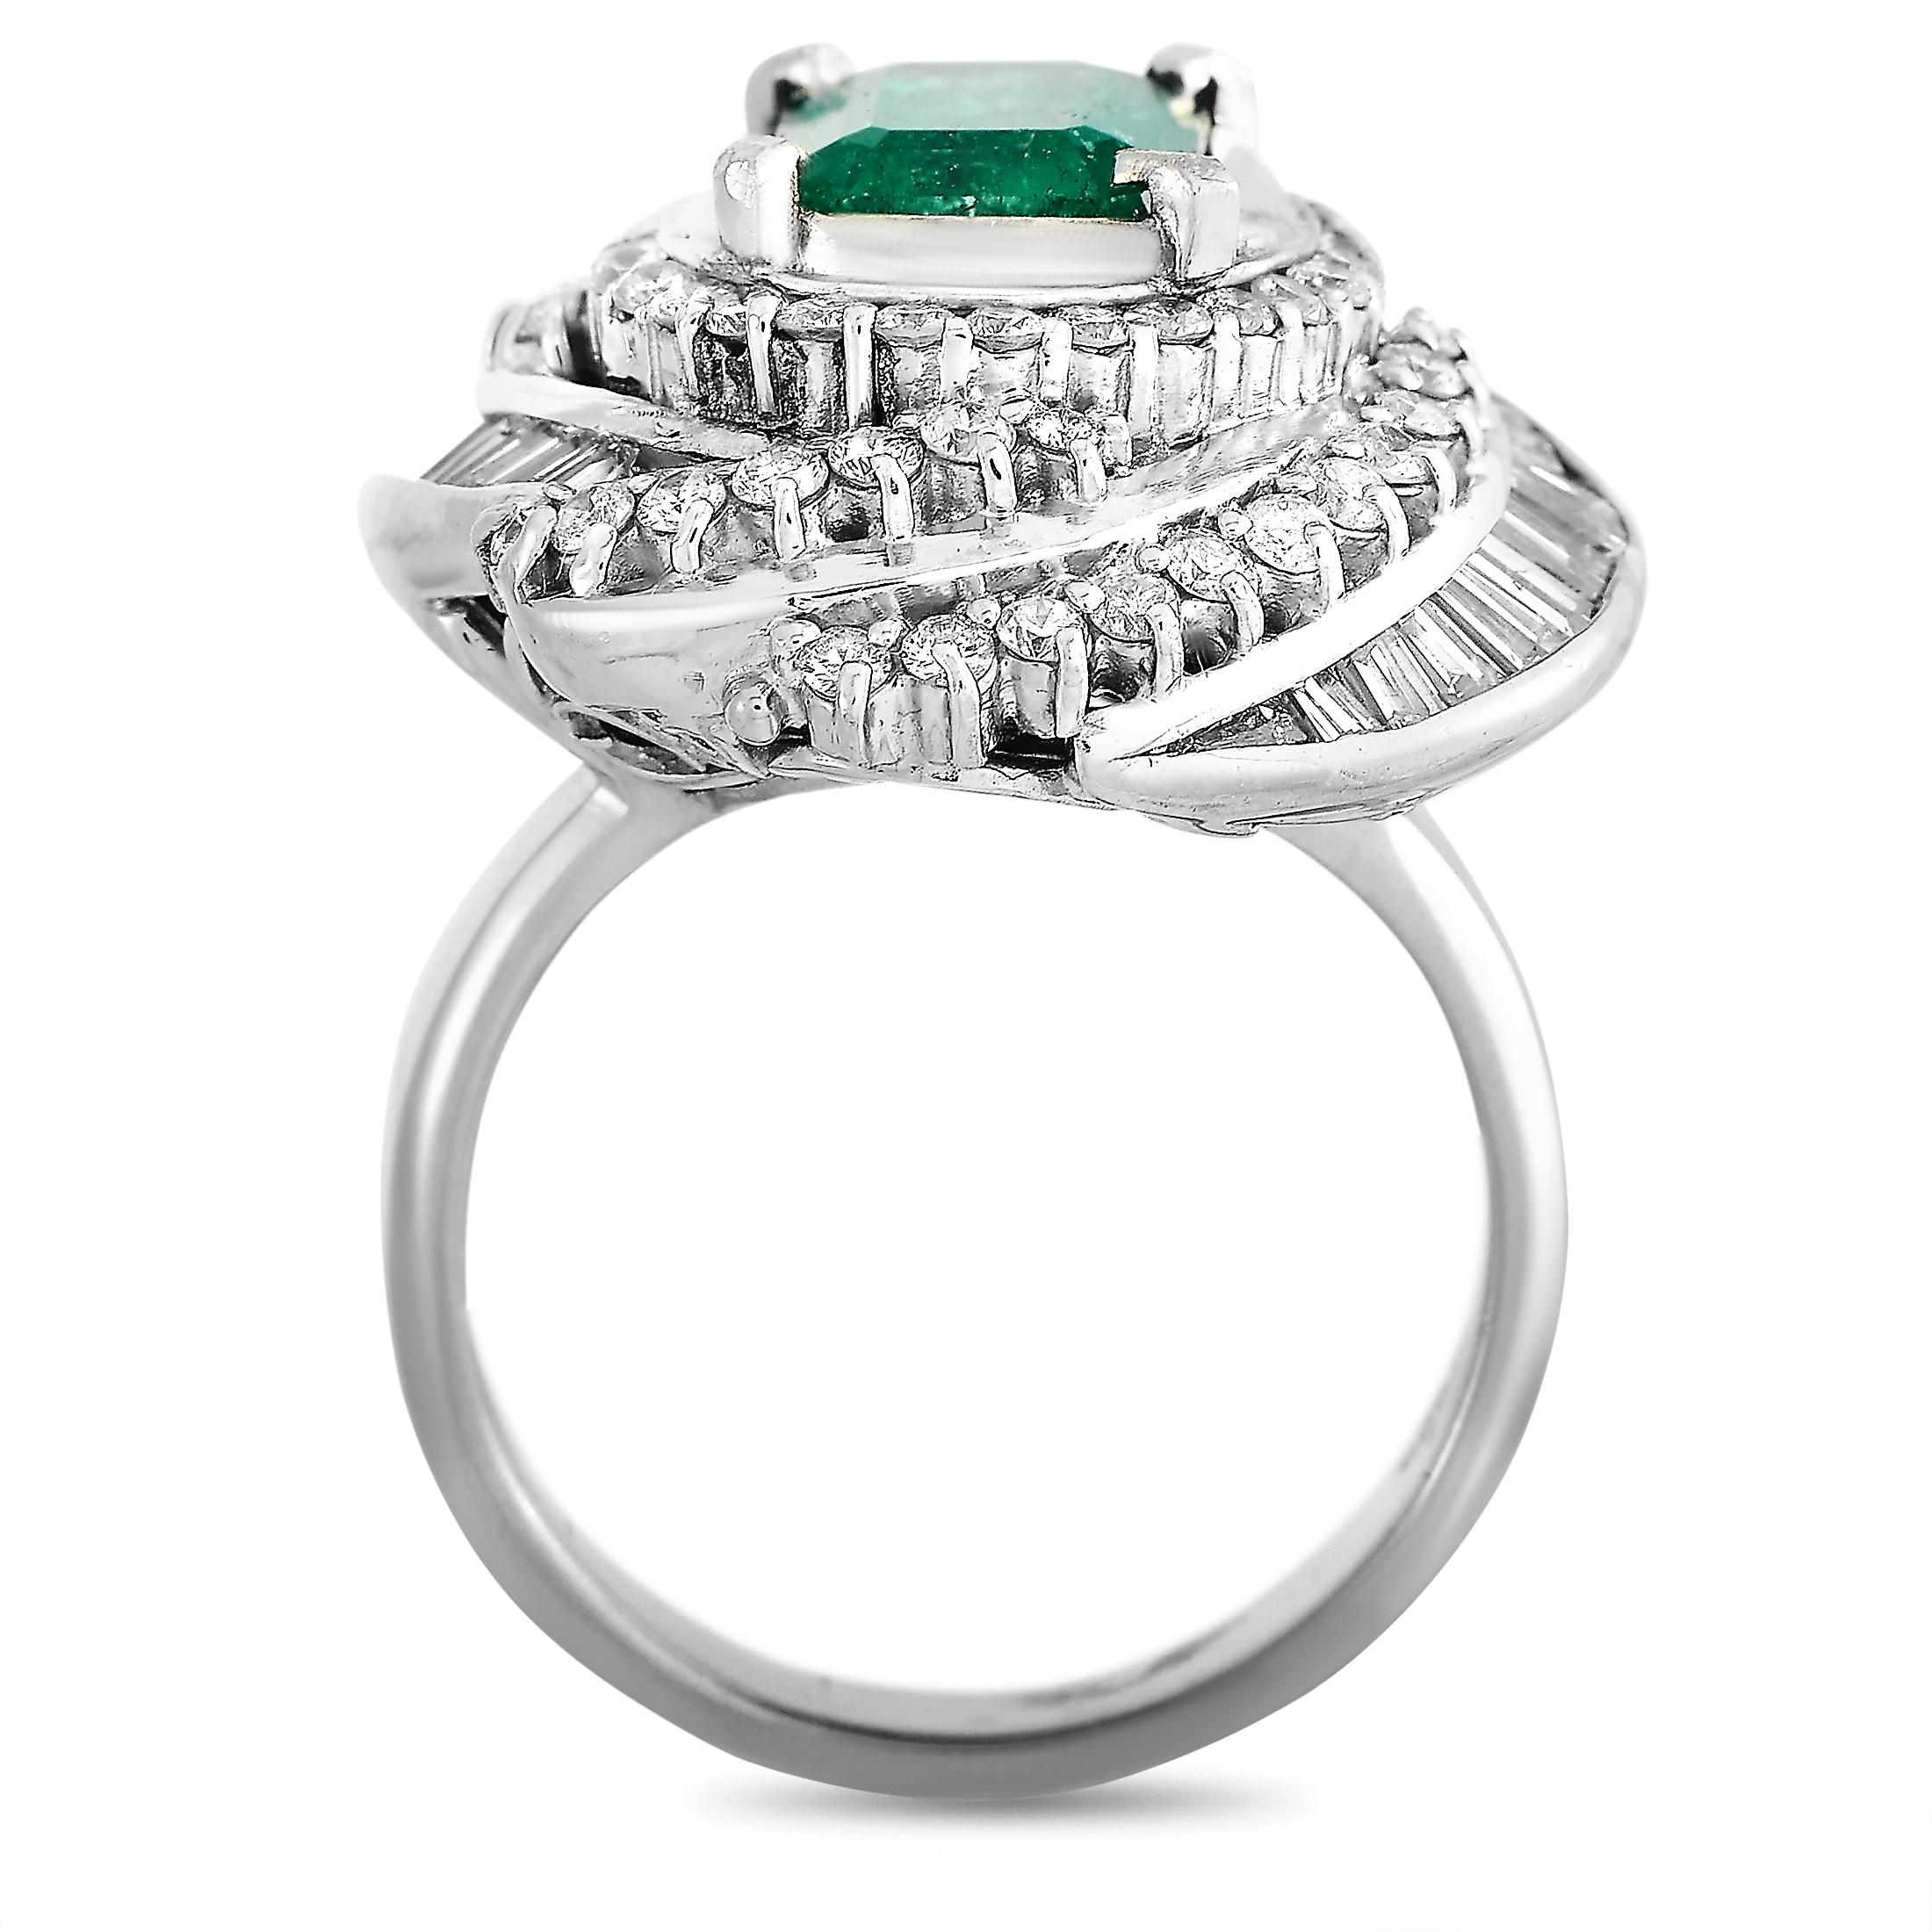 This LB Exclusive ring is crafted from platinum and weighs 17.4 grams, boasting band thickness of 4 mm and top height of 10 mm, while top dimensions measure 22 by 20 mm. The ring is set with a 2.33 ct emerald and a total of 1.79 carats of diamonds.
